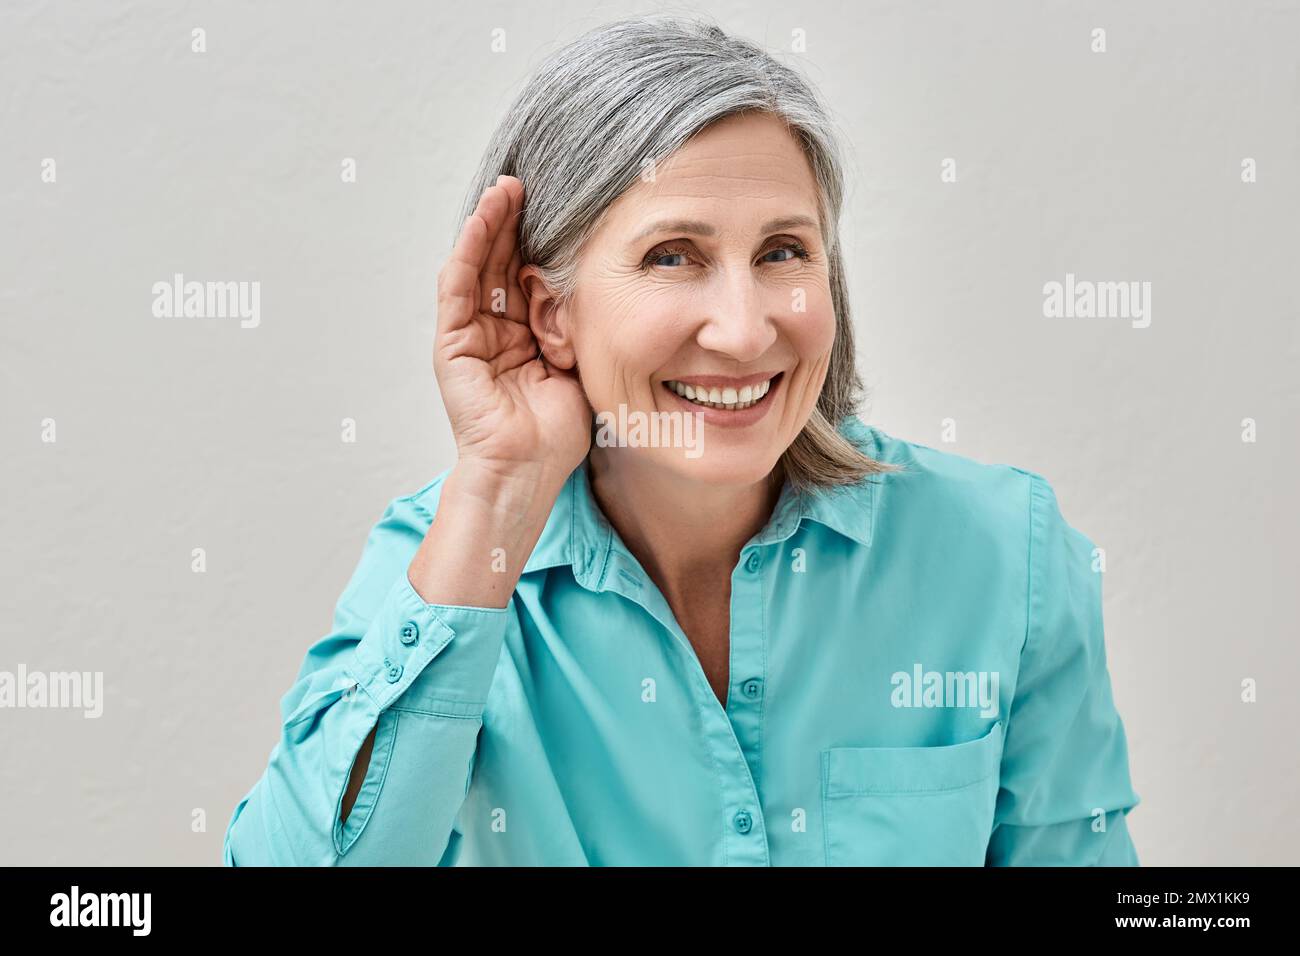 Mature Woman Listening Sound With Hand Near Ear For Hearing Check Up Hearing Test Concept Stock 